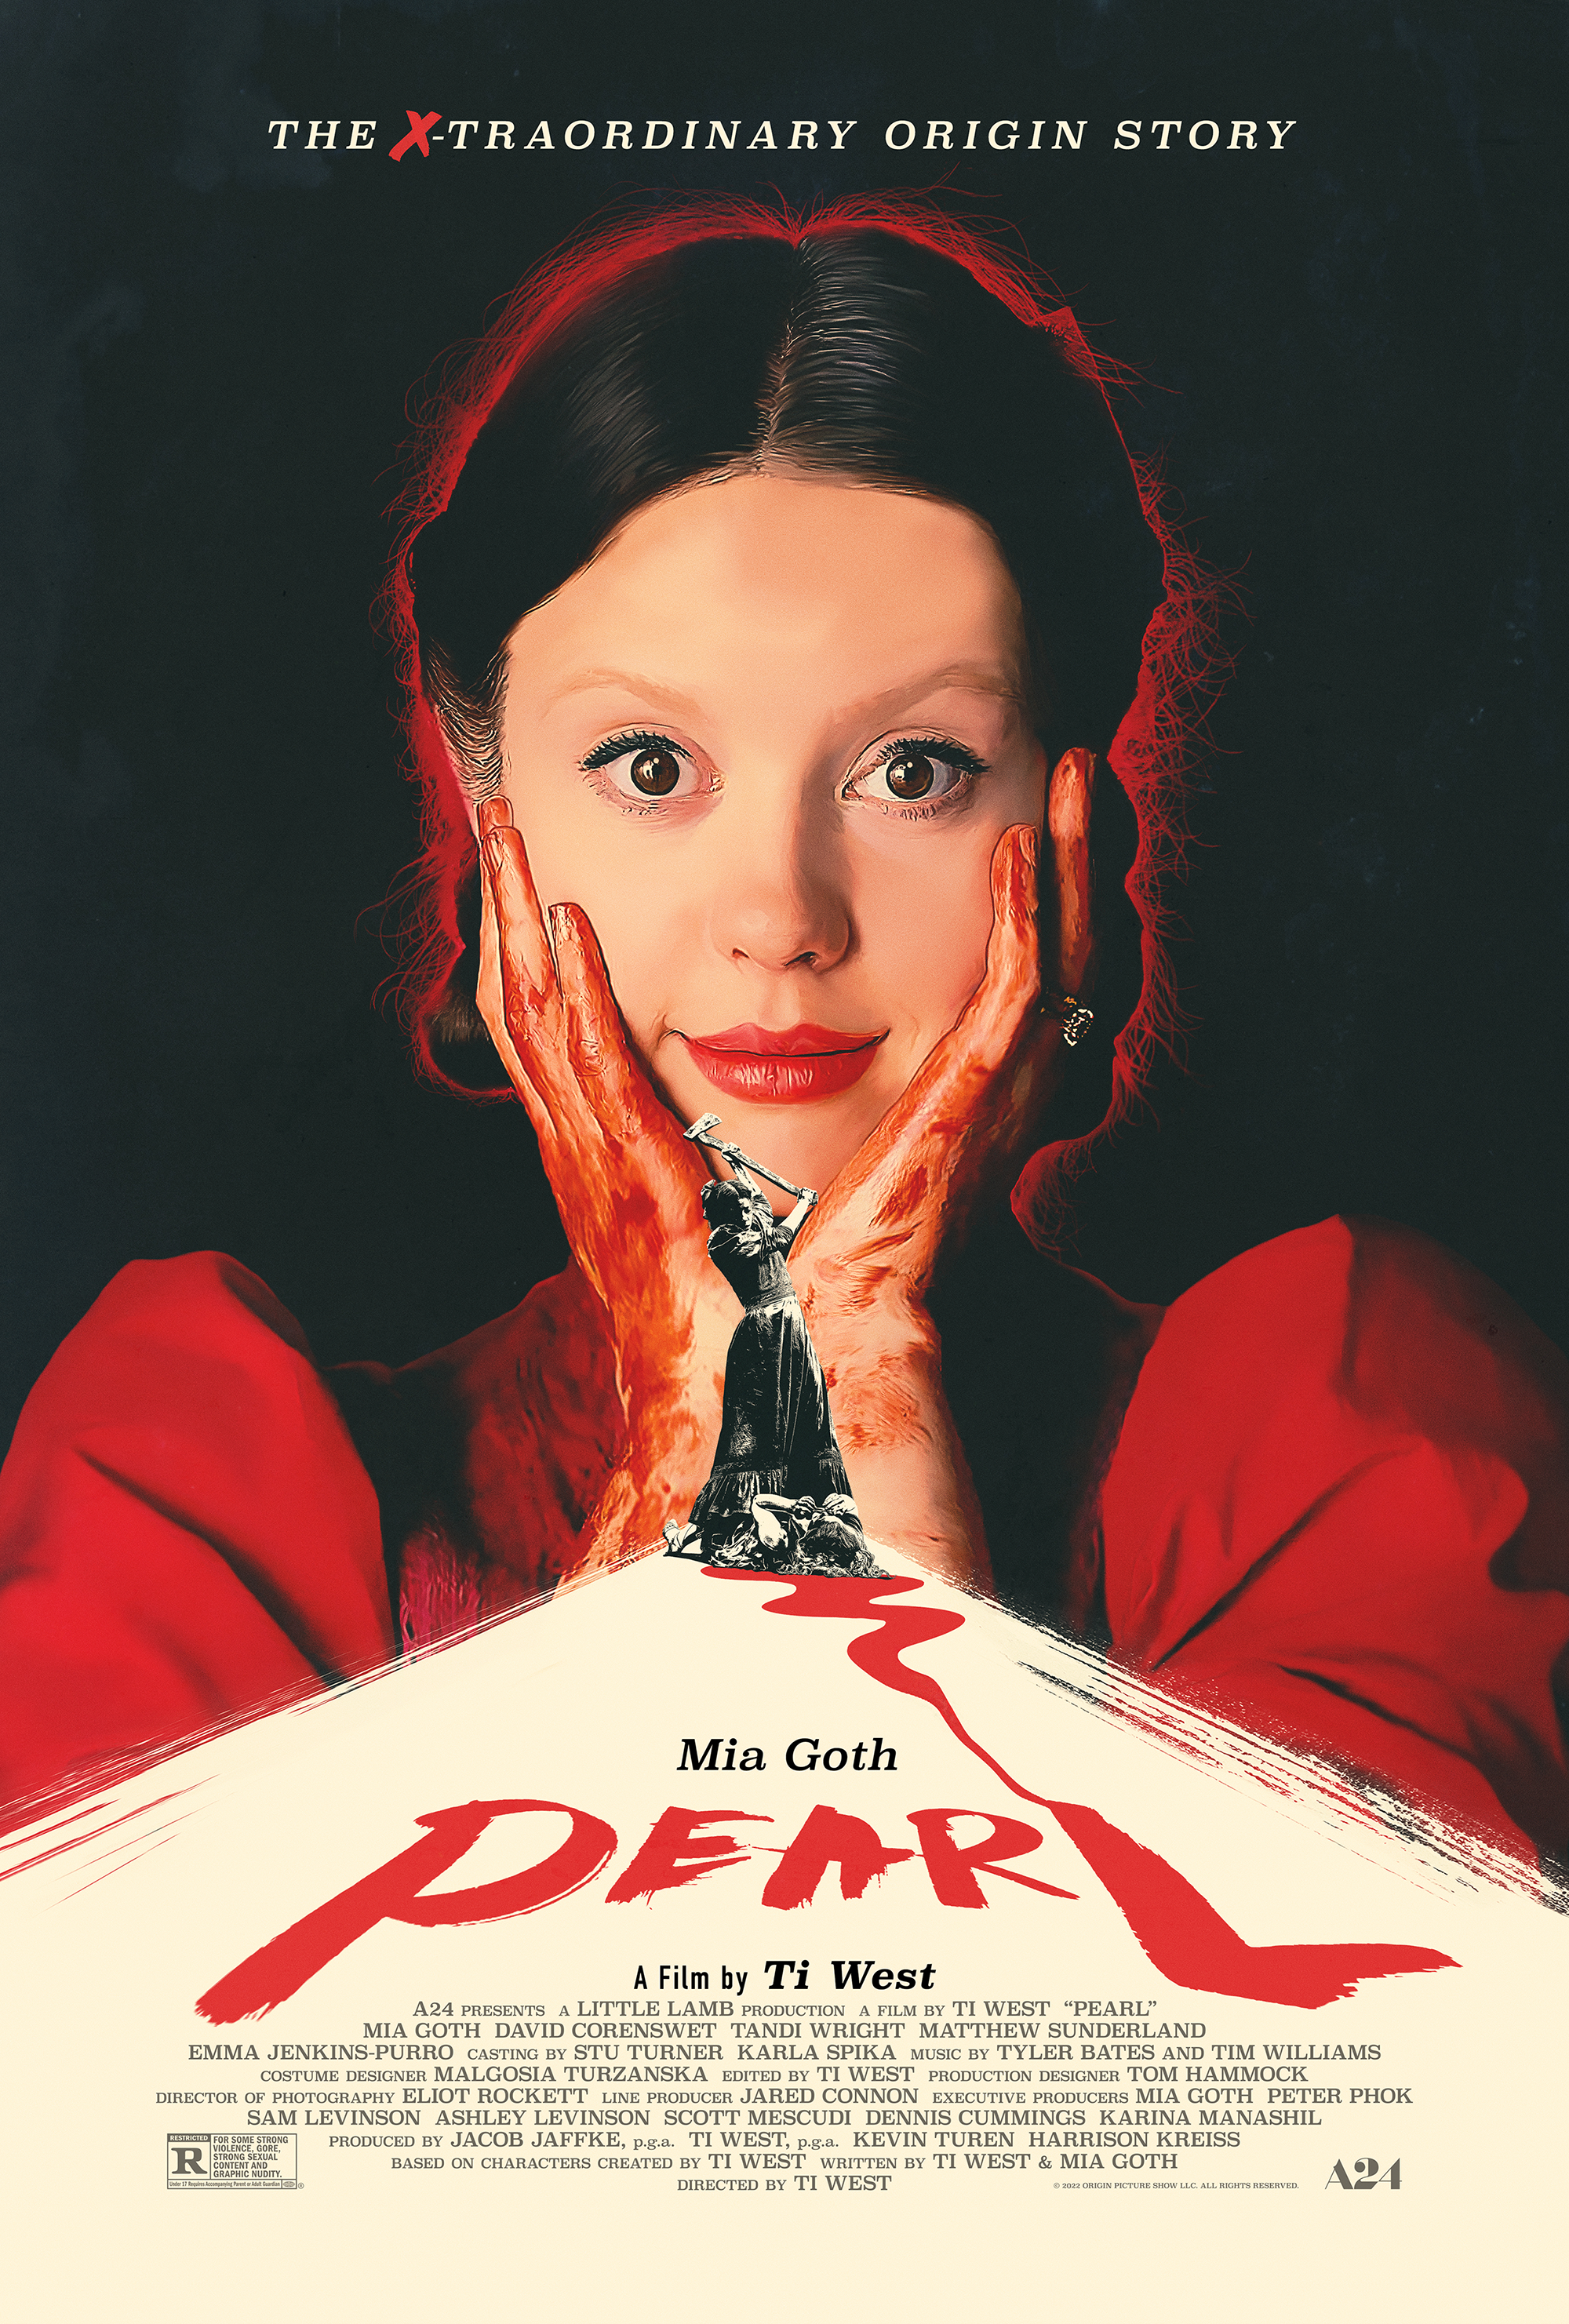 Pearl - Movie Review 